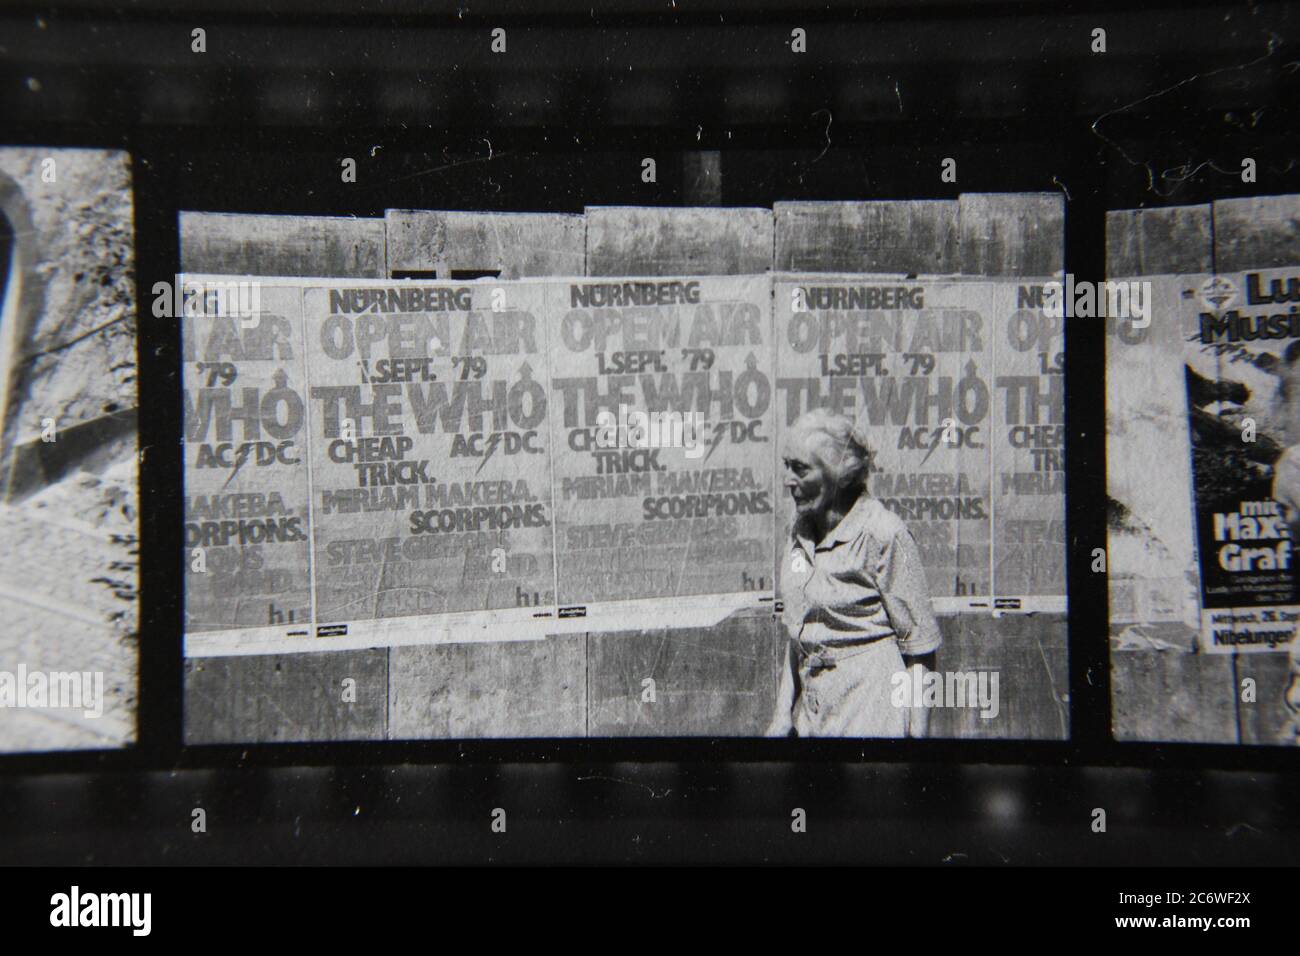 Fine 70s vintage black and white lifestyle photography of a wall of posters of upcoming events such as The Who in Nurnberg, Germany. Stock Photo